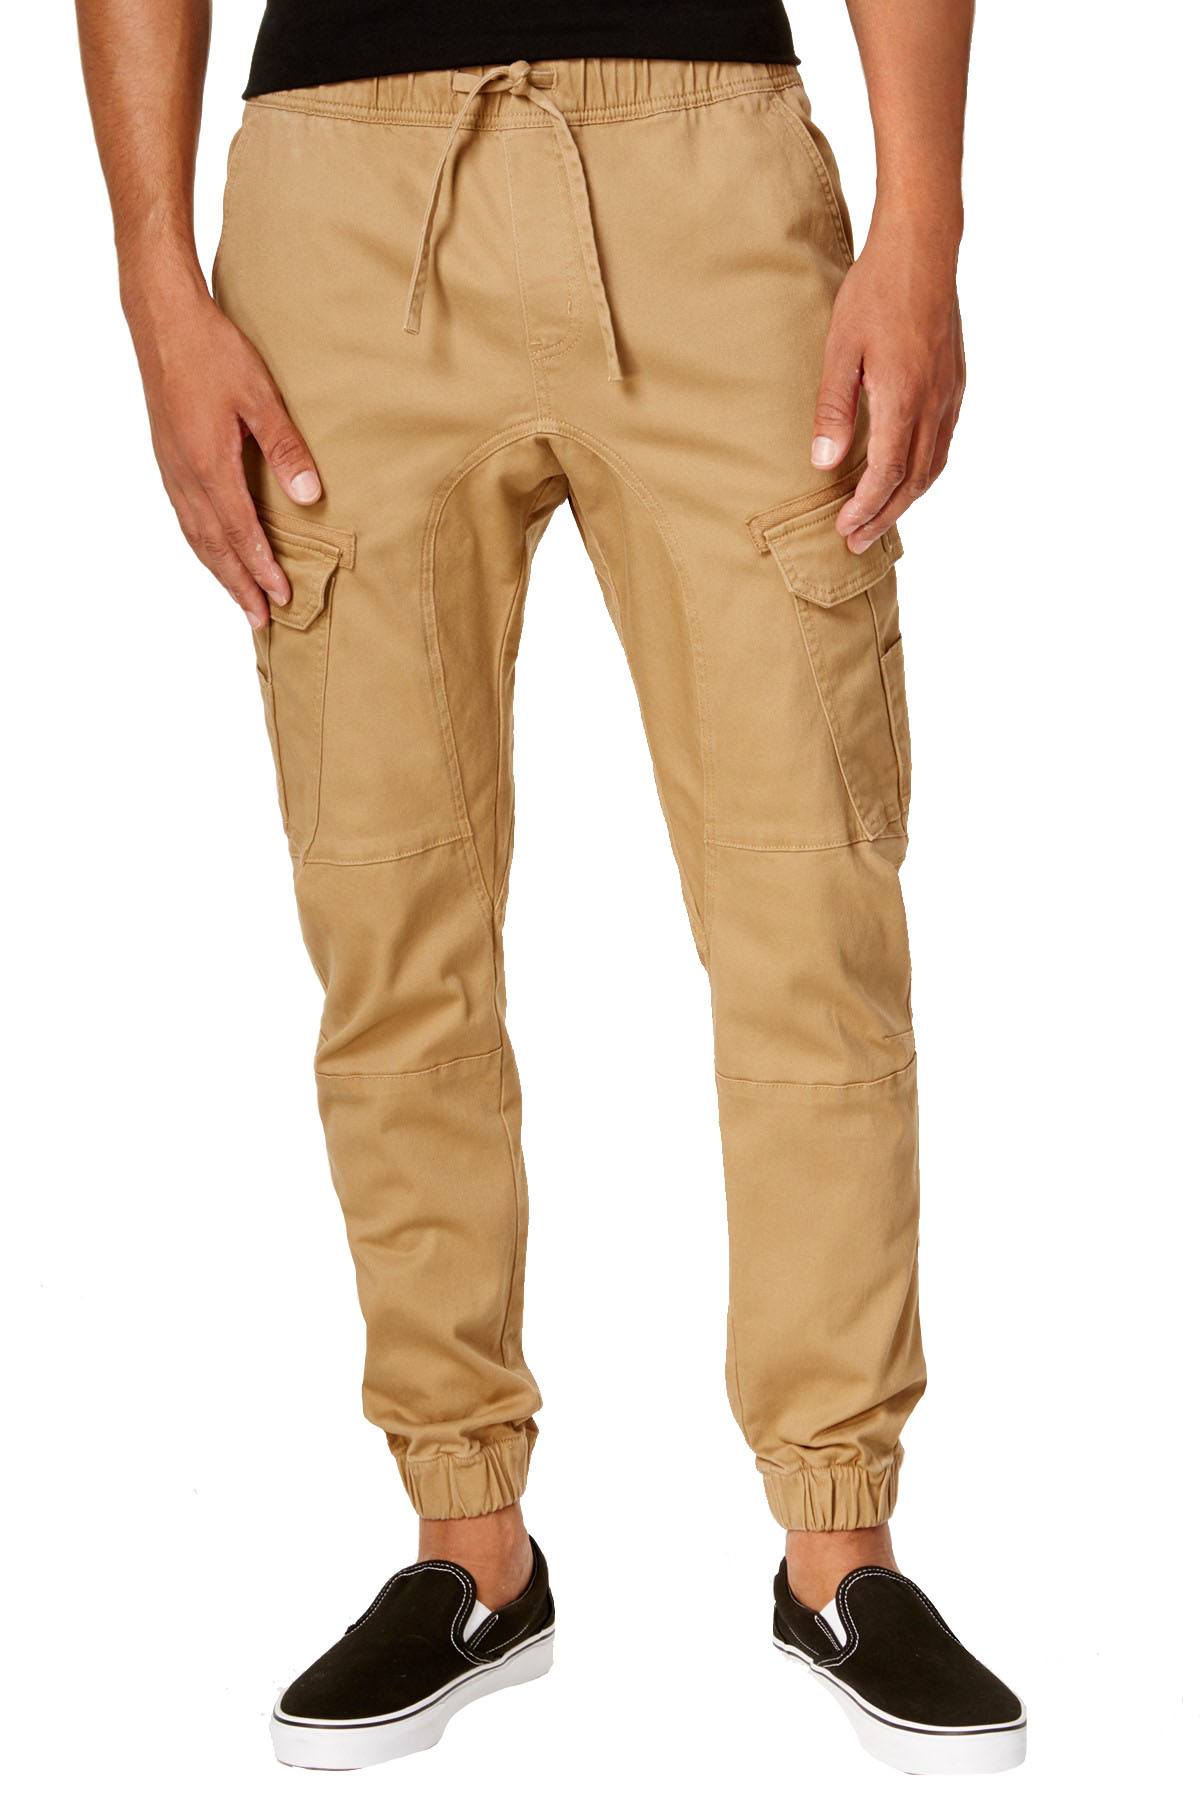 Ring of Fire Dull Gold Stretch Jogger Pant | CheapUndies